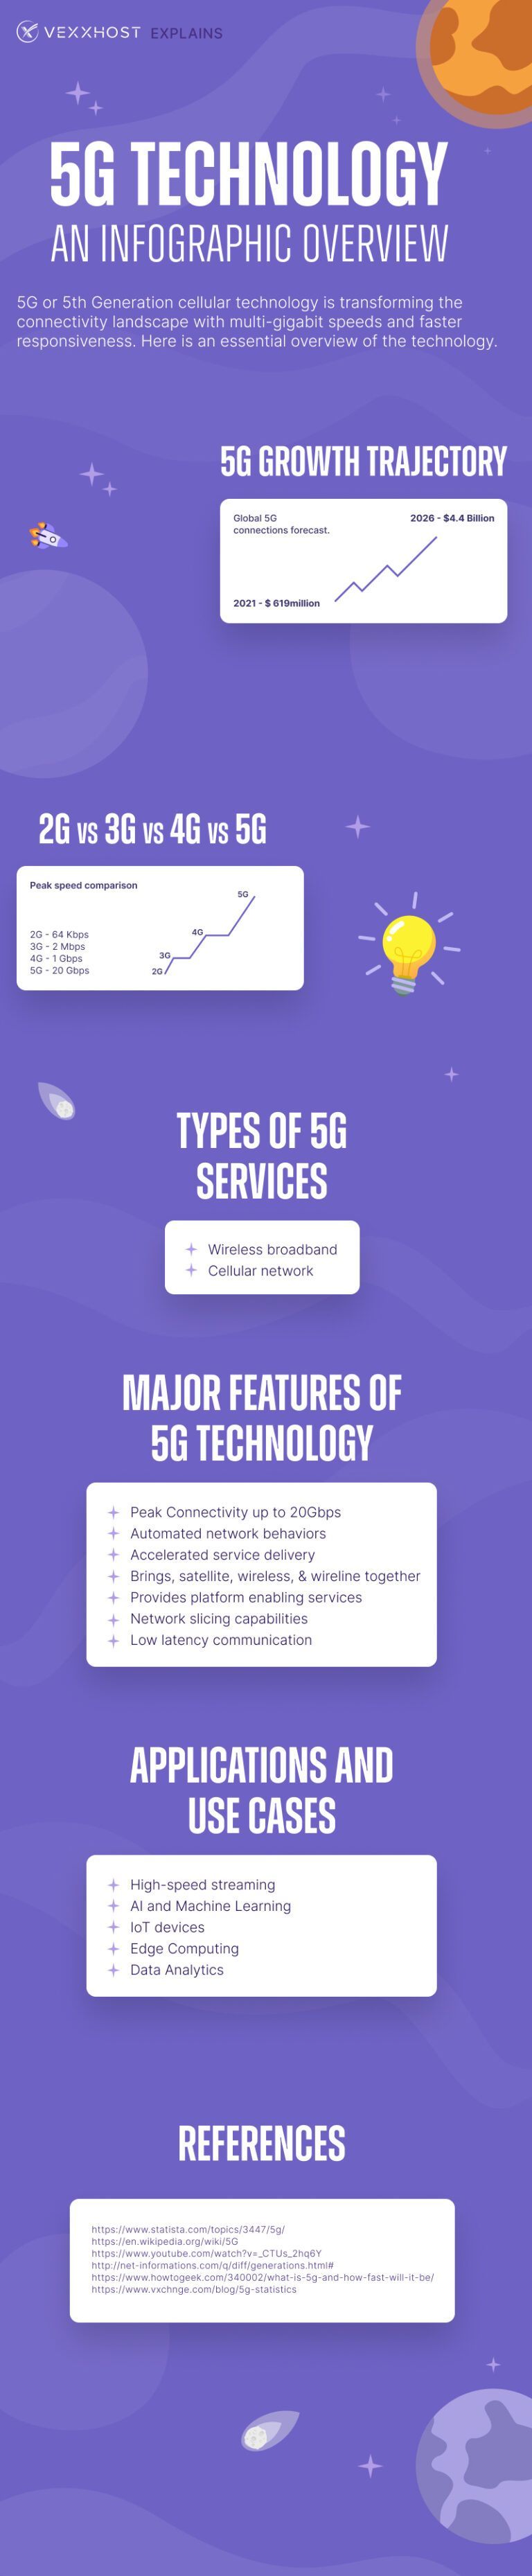 5G Technology - An Infographic Overview